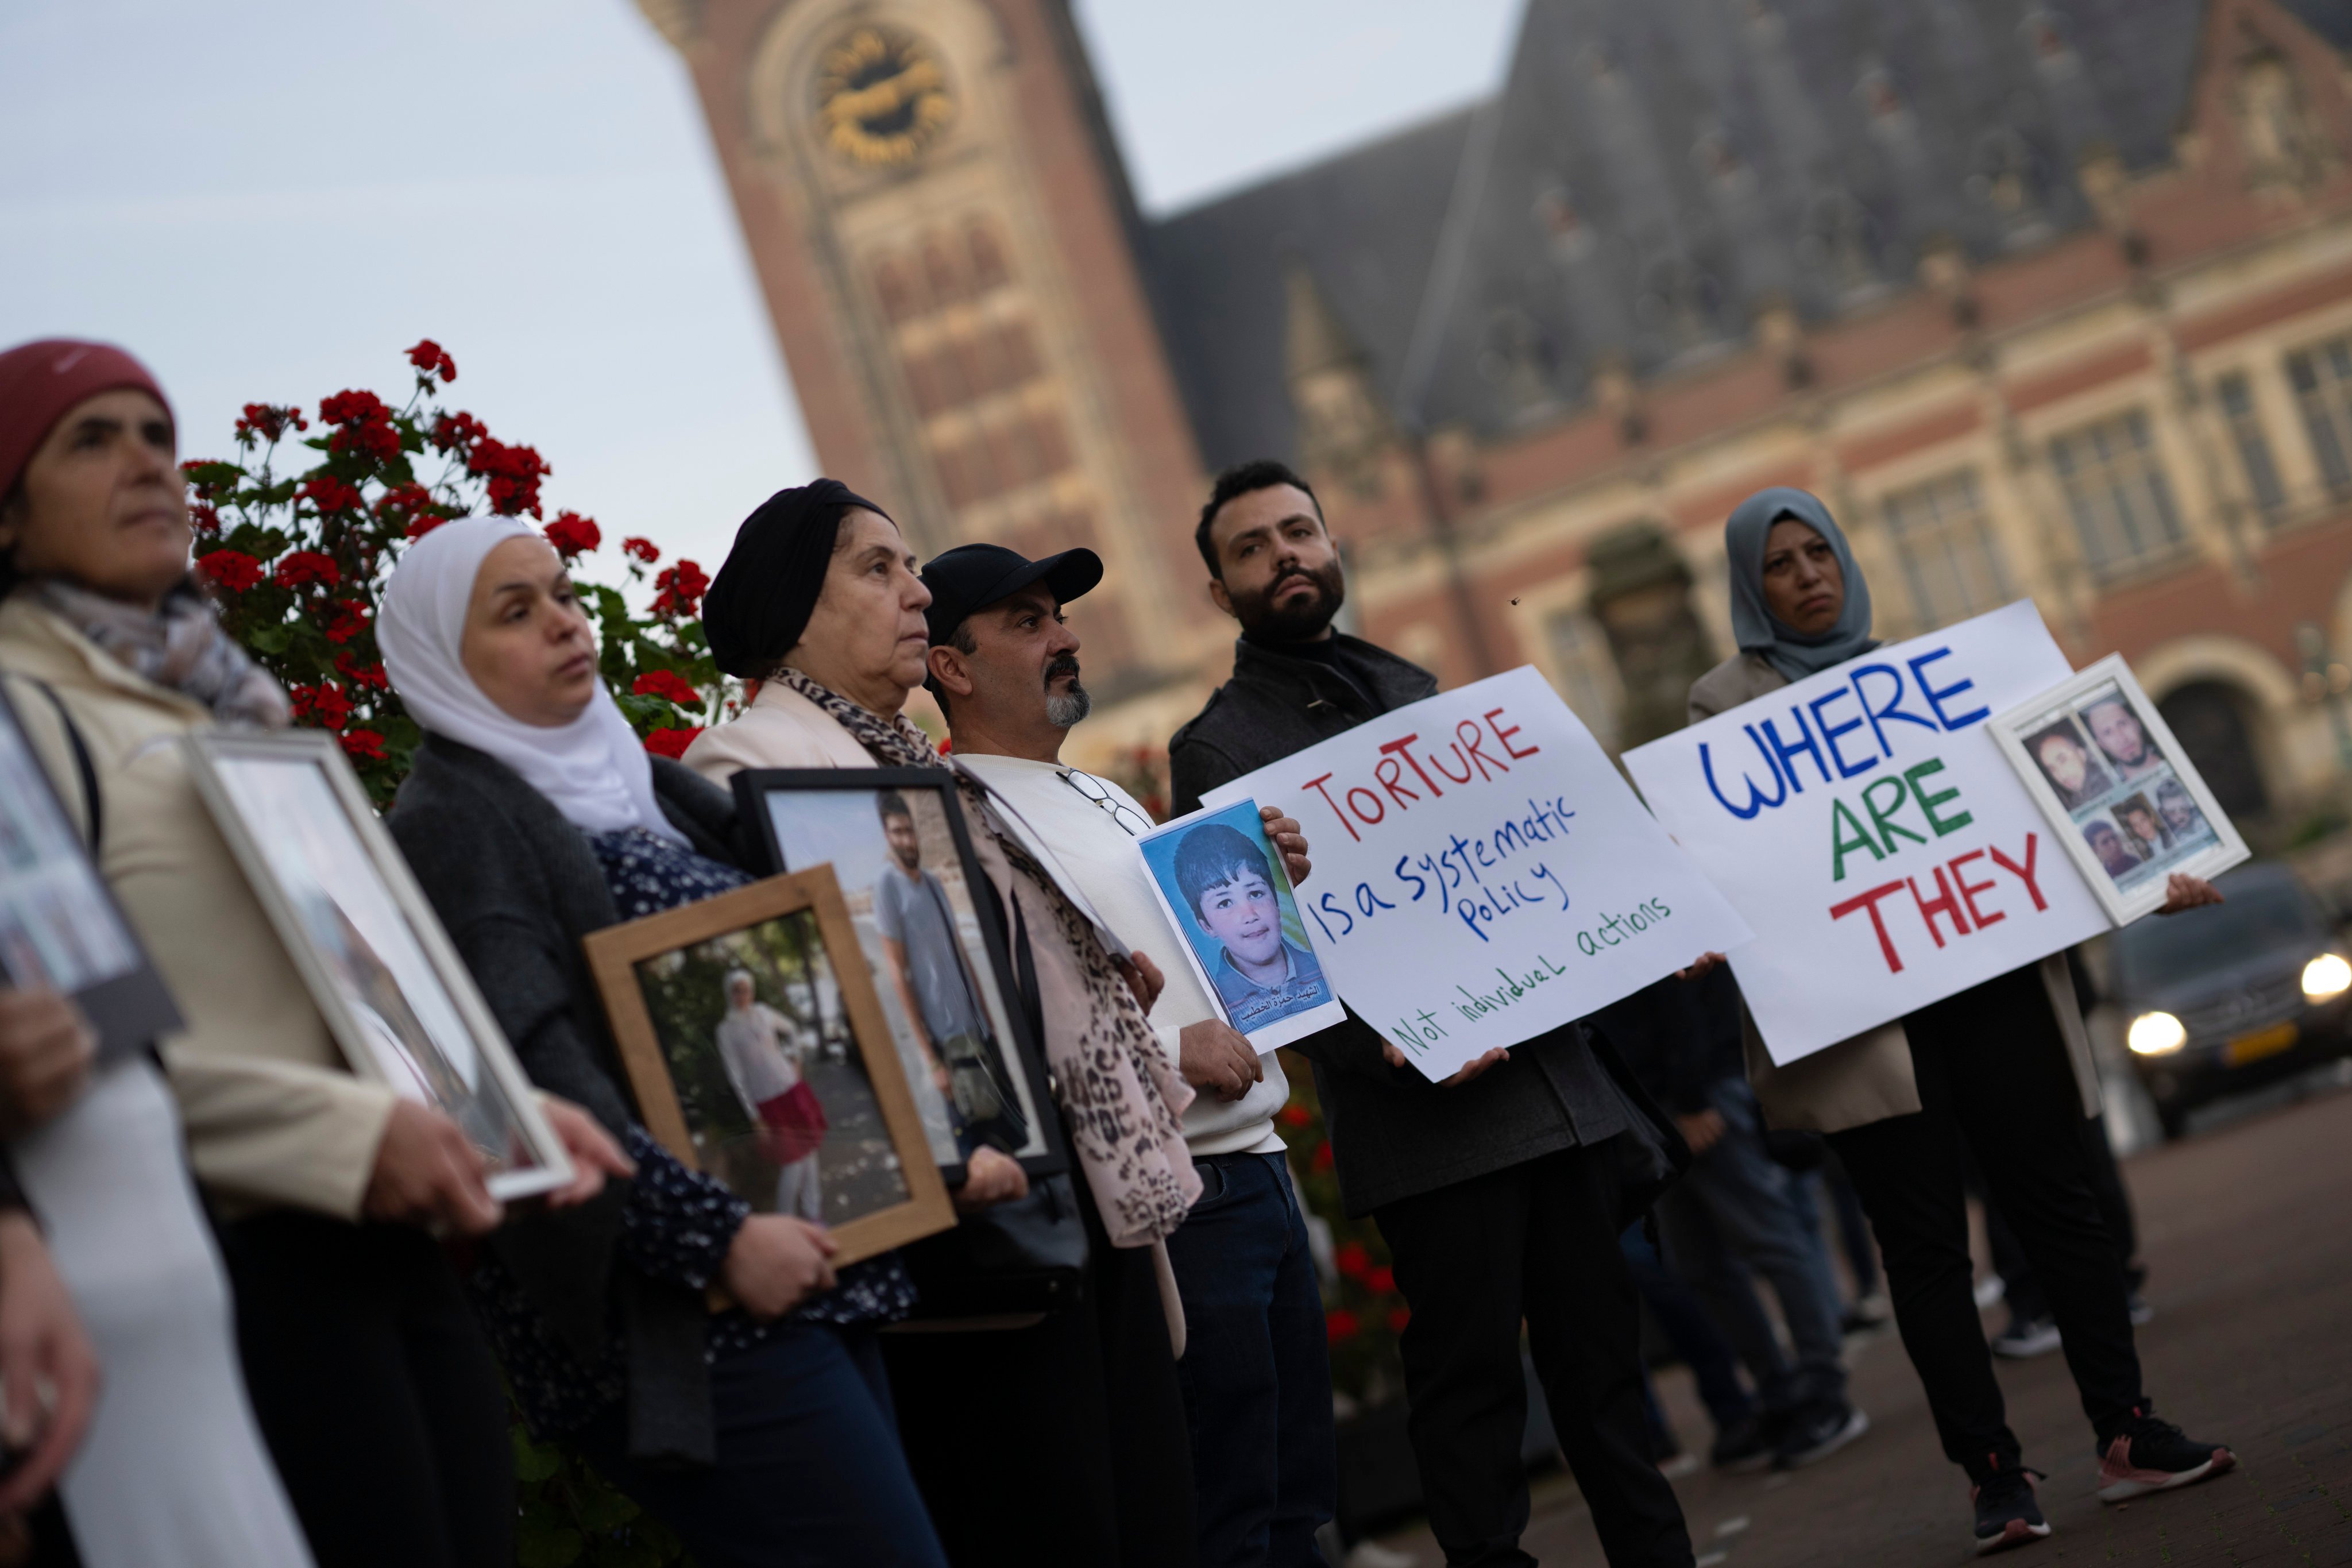 Demonstrators display pictures of people they say disappeared in Syria, outside the International Court of Justice in The Hague on Tuesday. Photo: AP